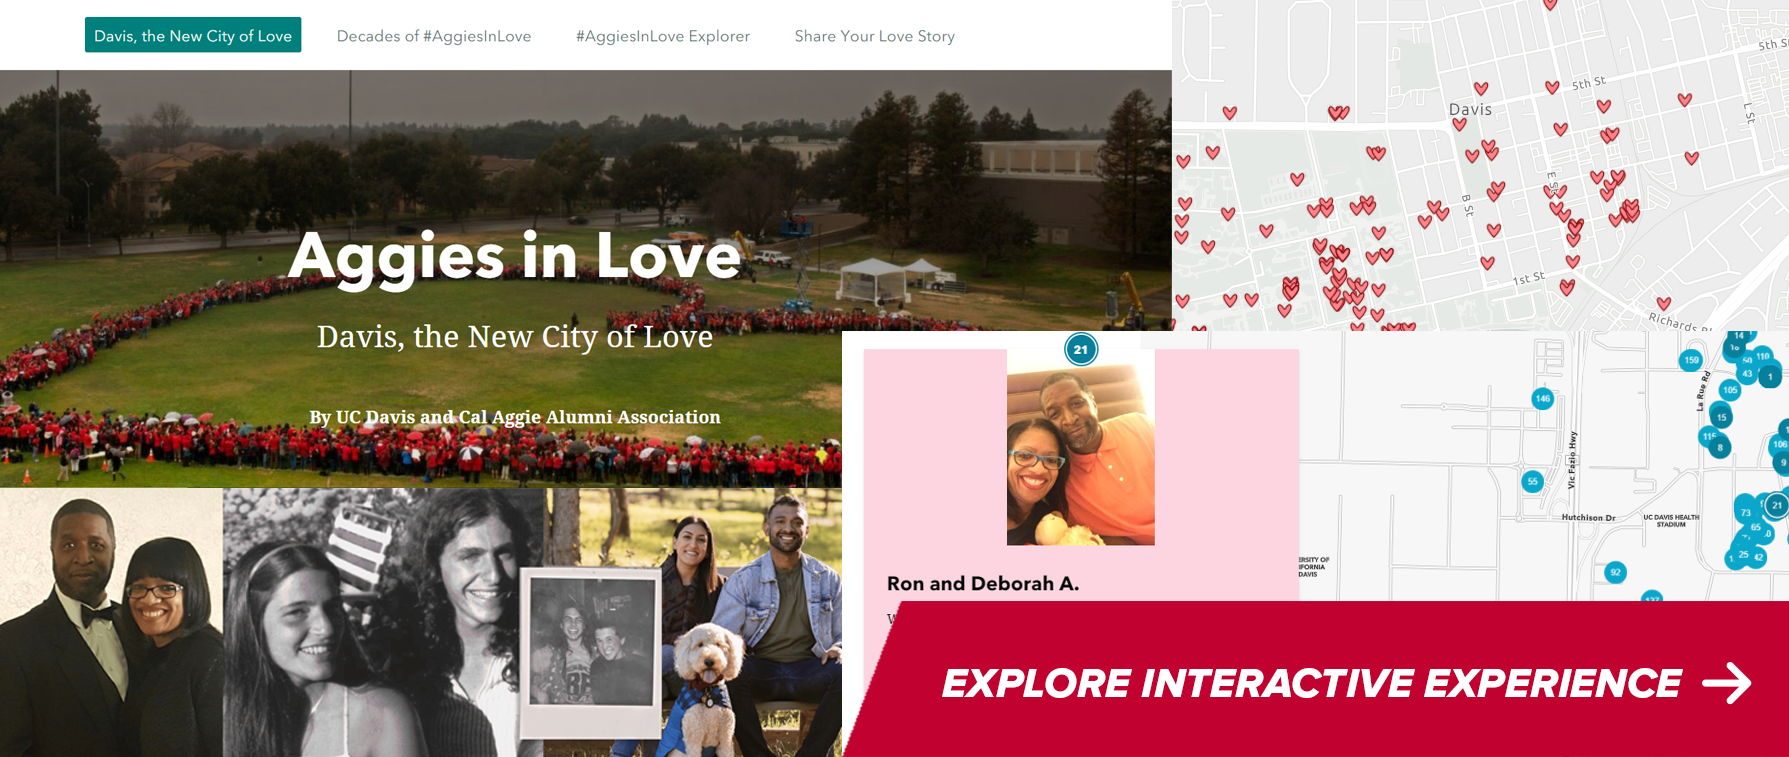 A collage of a header image from Aggies in Love story map with a birds eye view photo of UC Davis community members forming a heart while wearing red shirts, a collage of photos from the present and past of UC Davis community members in love, as well as a screenshot of a map. There is a red overlay with text reading "Explore interactive experience".